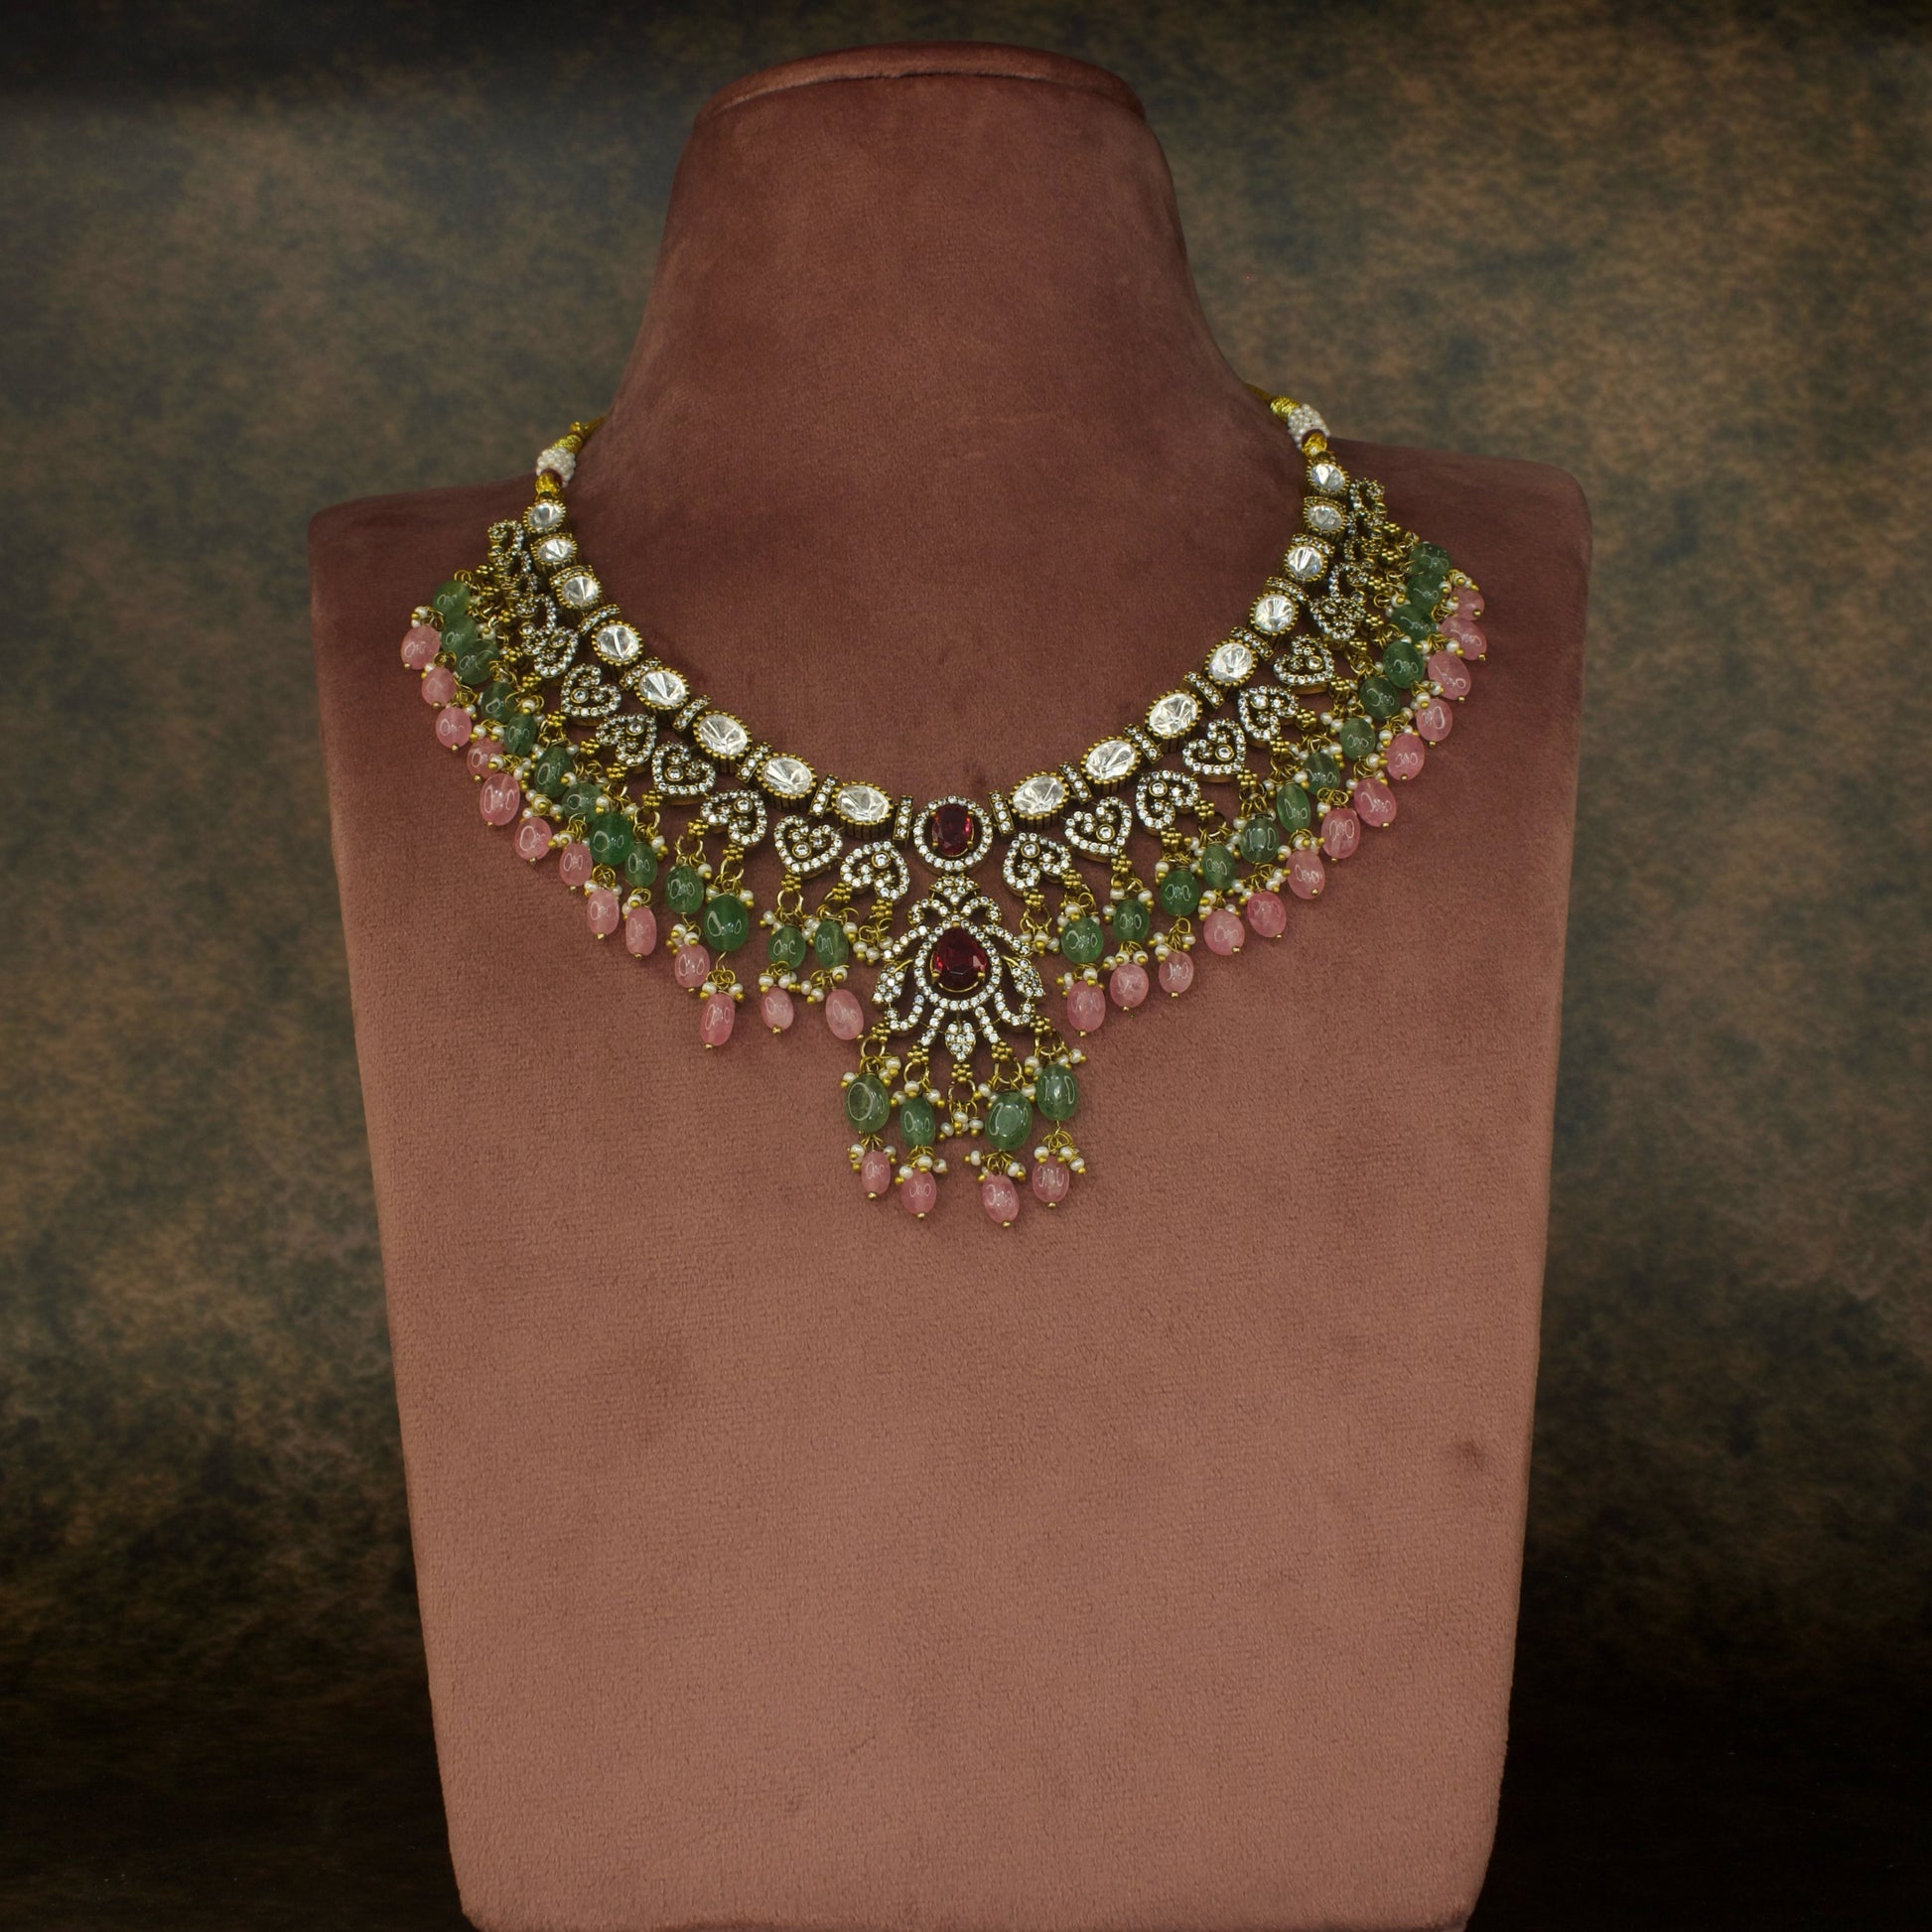 Scintillating Polki Victorian Necklace Set with High Quality Victorian Finish. This product belongs to Victorian Jewellery category